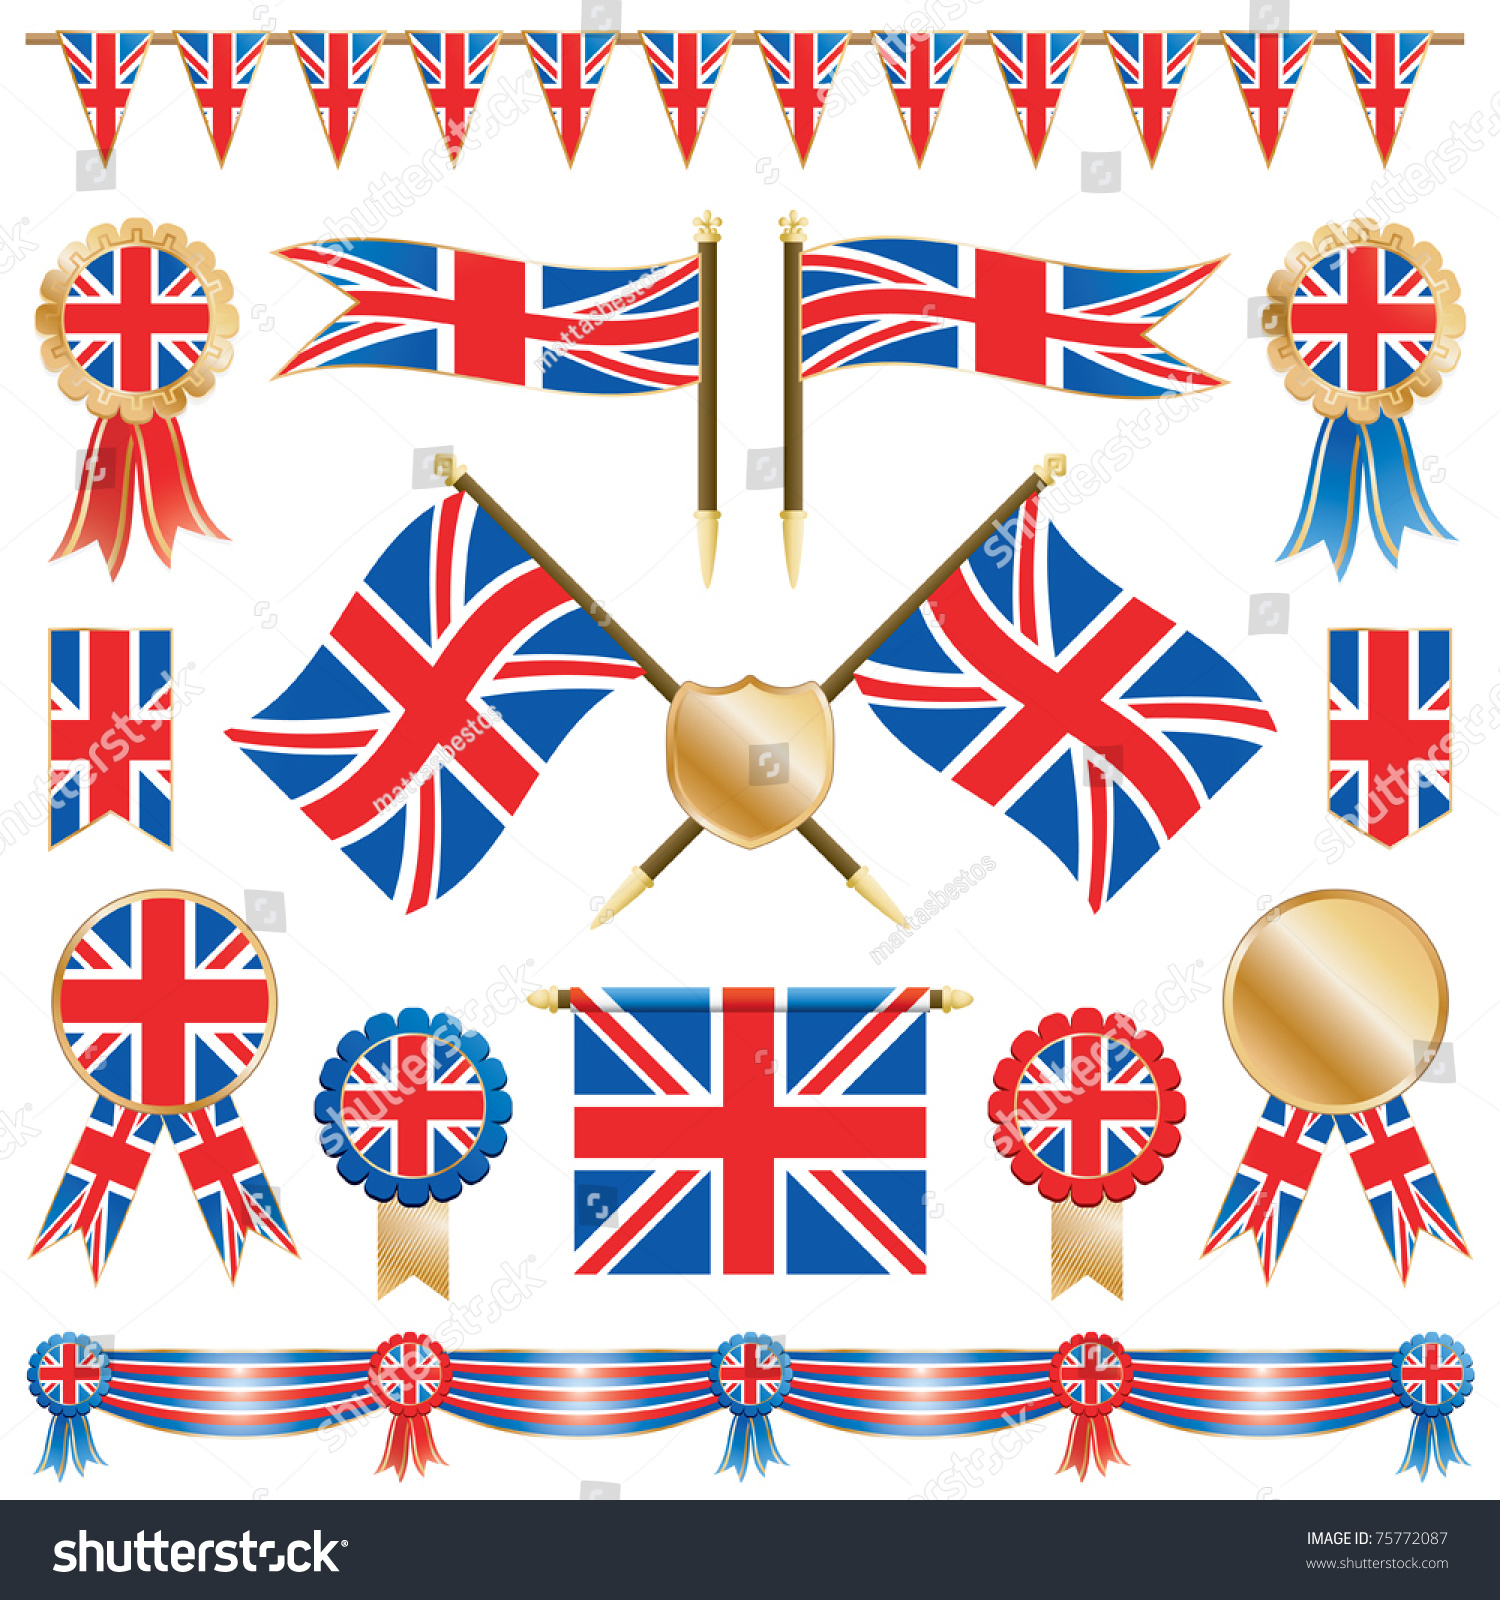 SVG of united kingdom decorative ribbons, flags and rosettes isolated on white svg